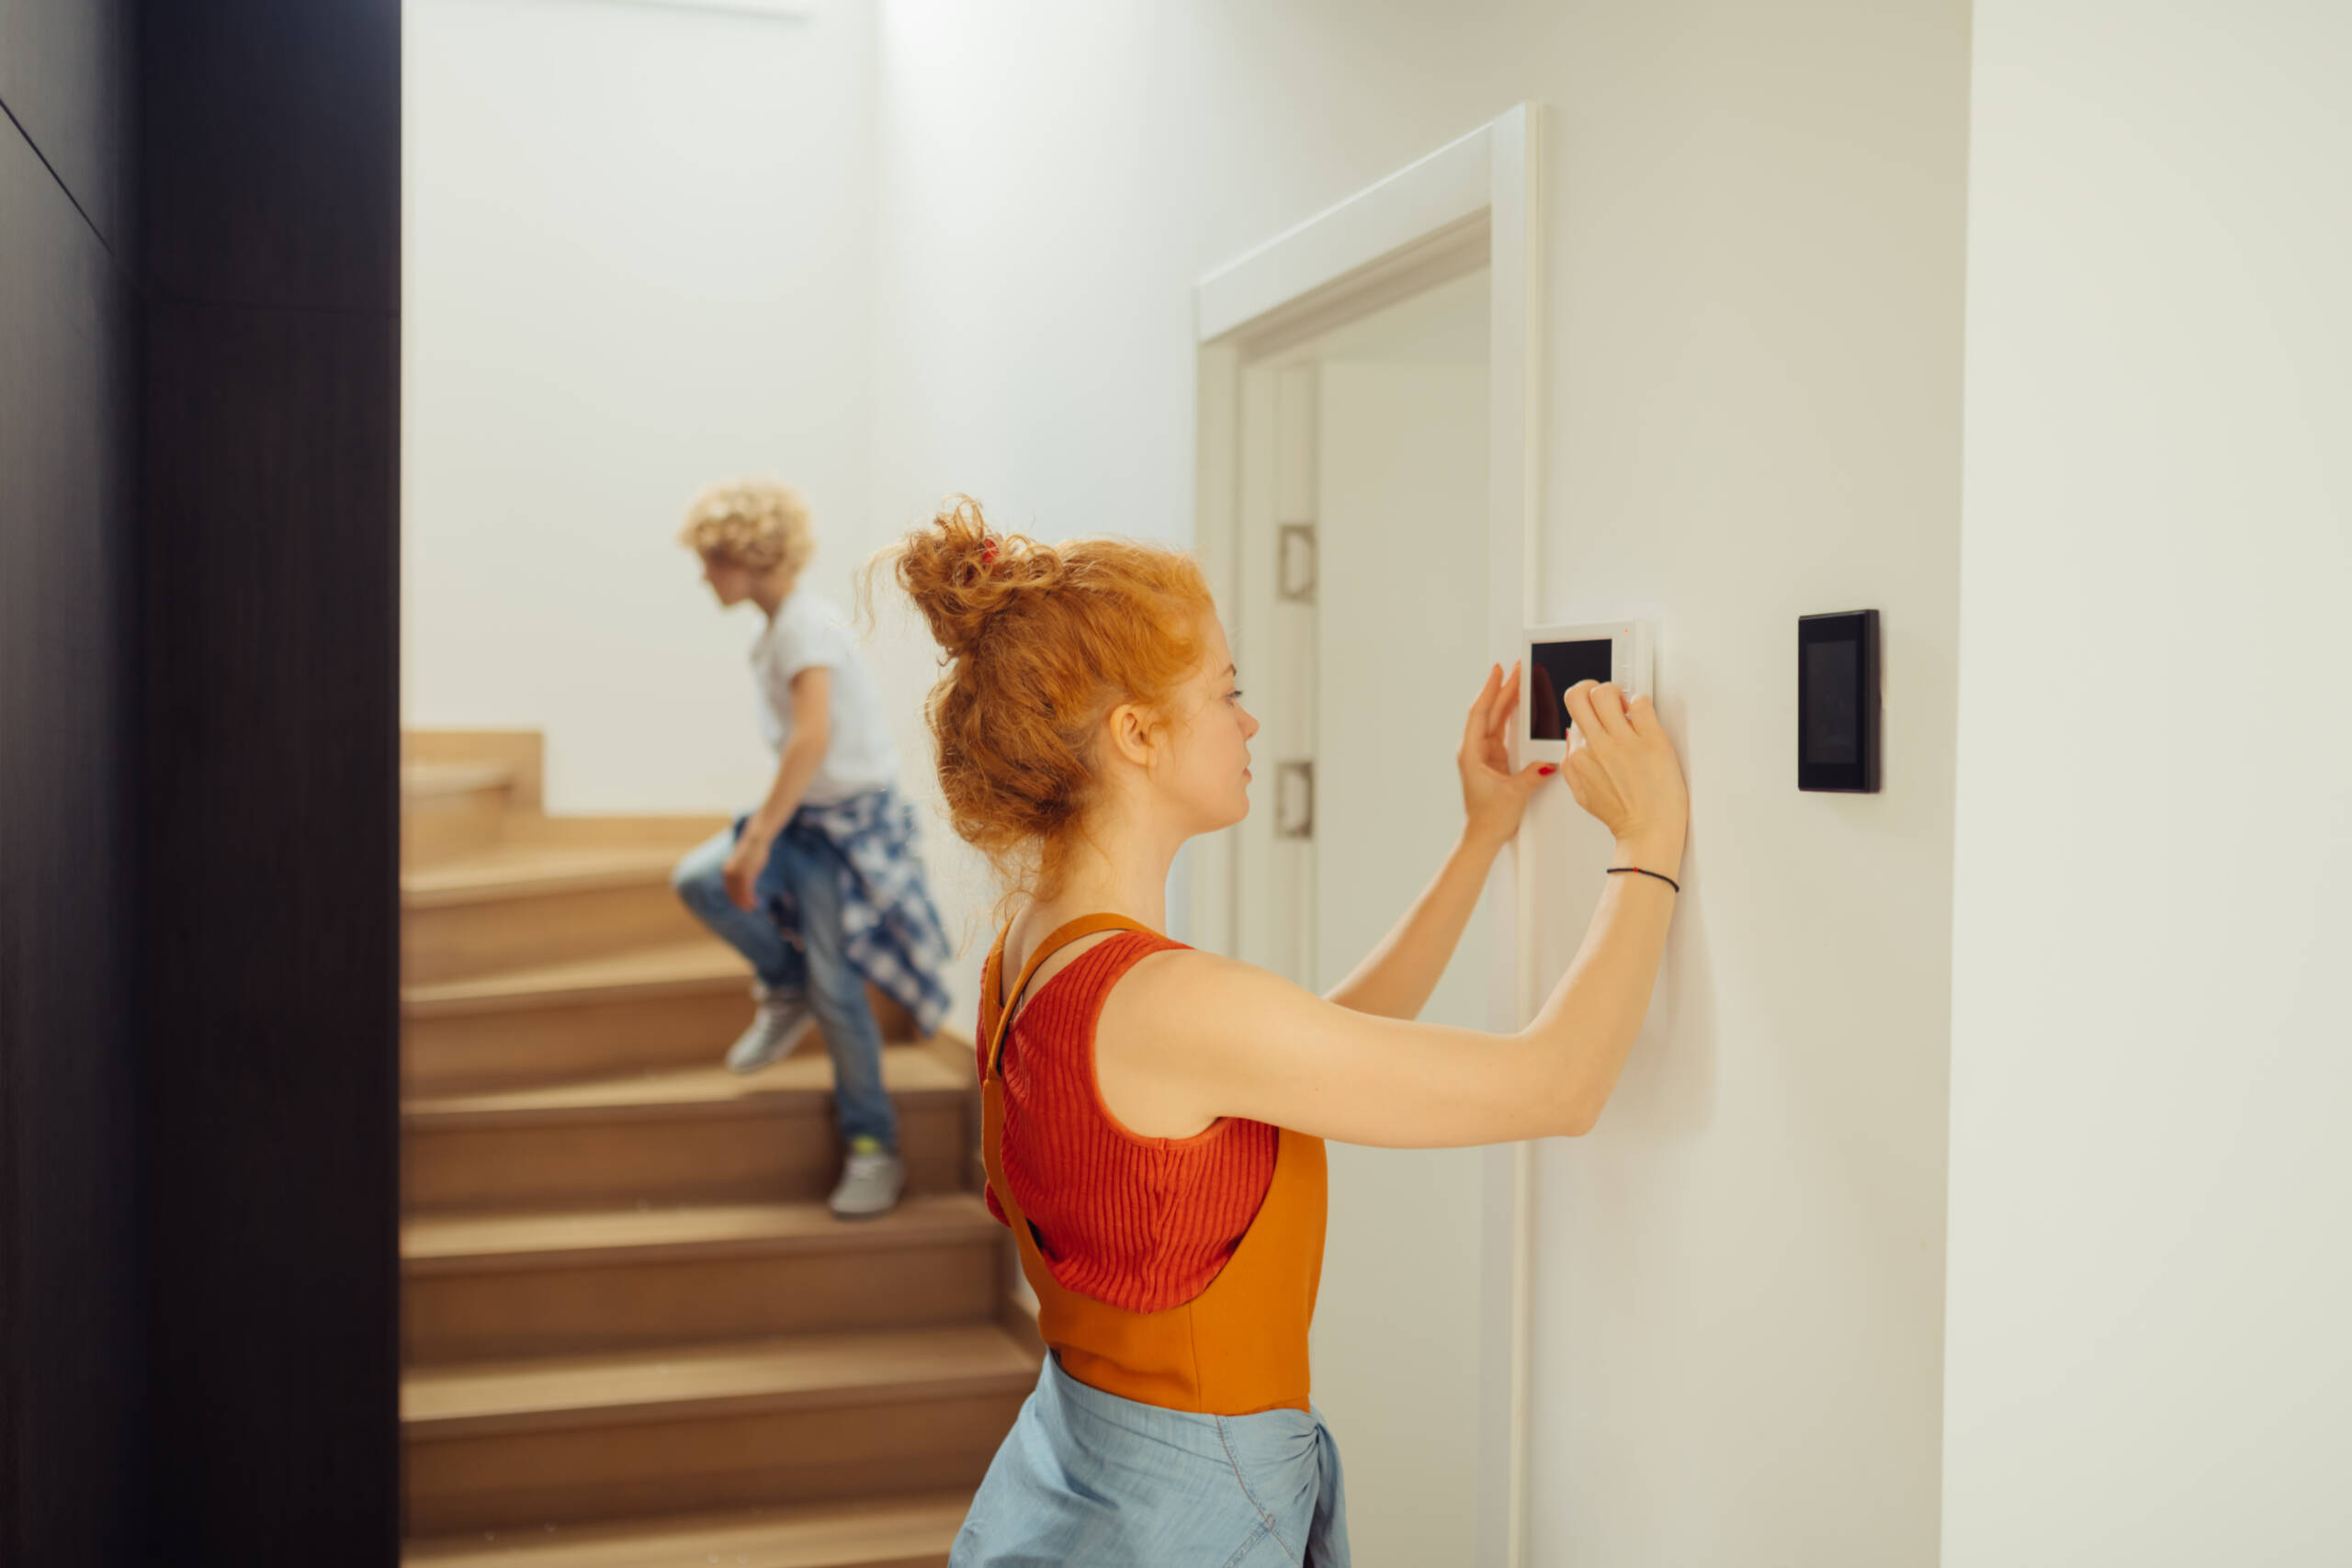 Woman adjusts the thermostat of her home. A child can be seen running up the stairs in the background.